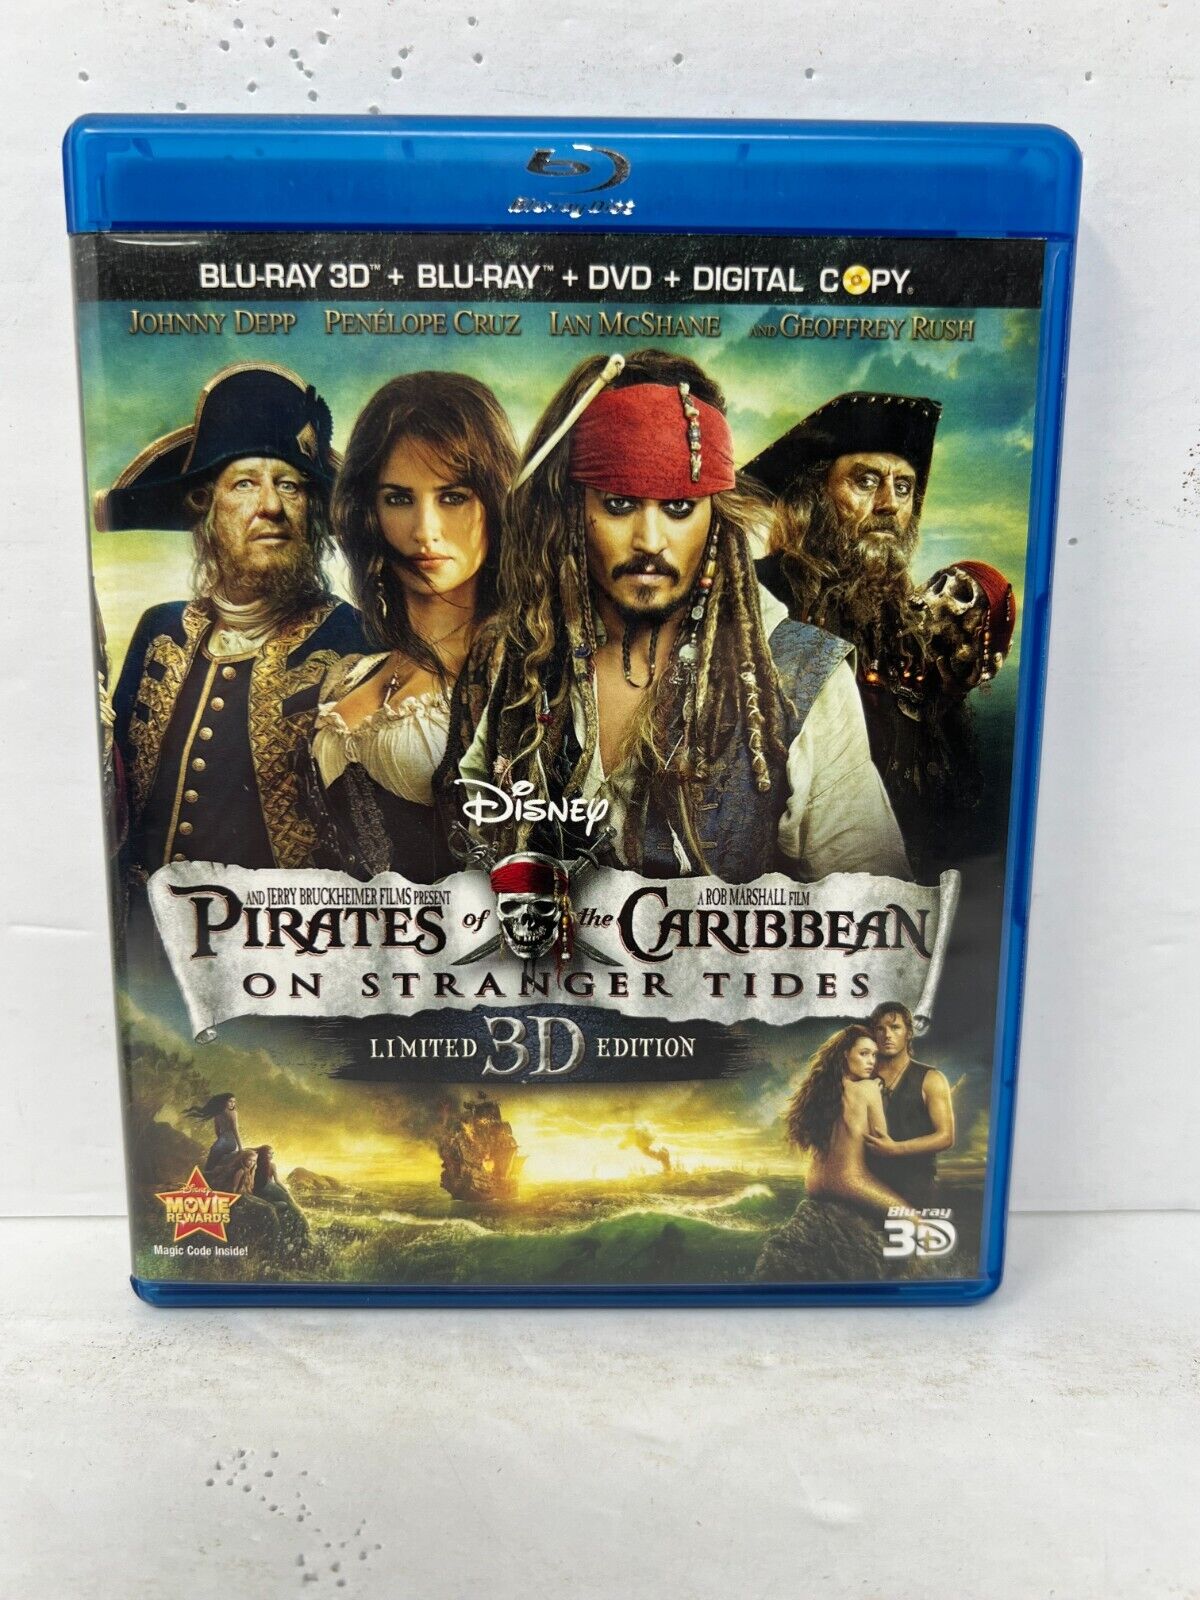 Pirates of the Caribbean On Stranger Tides (Blu-ray 3D) Fantasy Good Condition!!